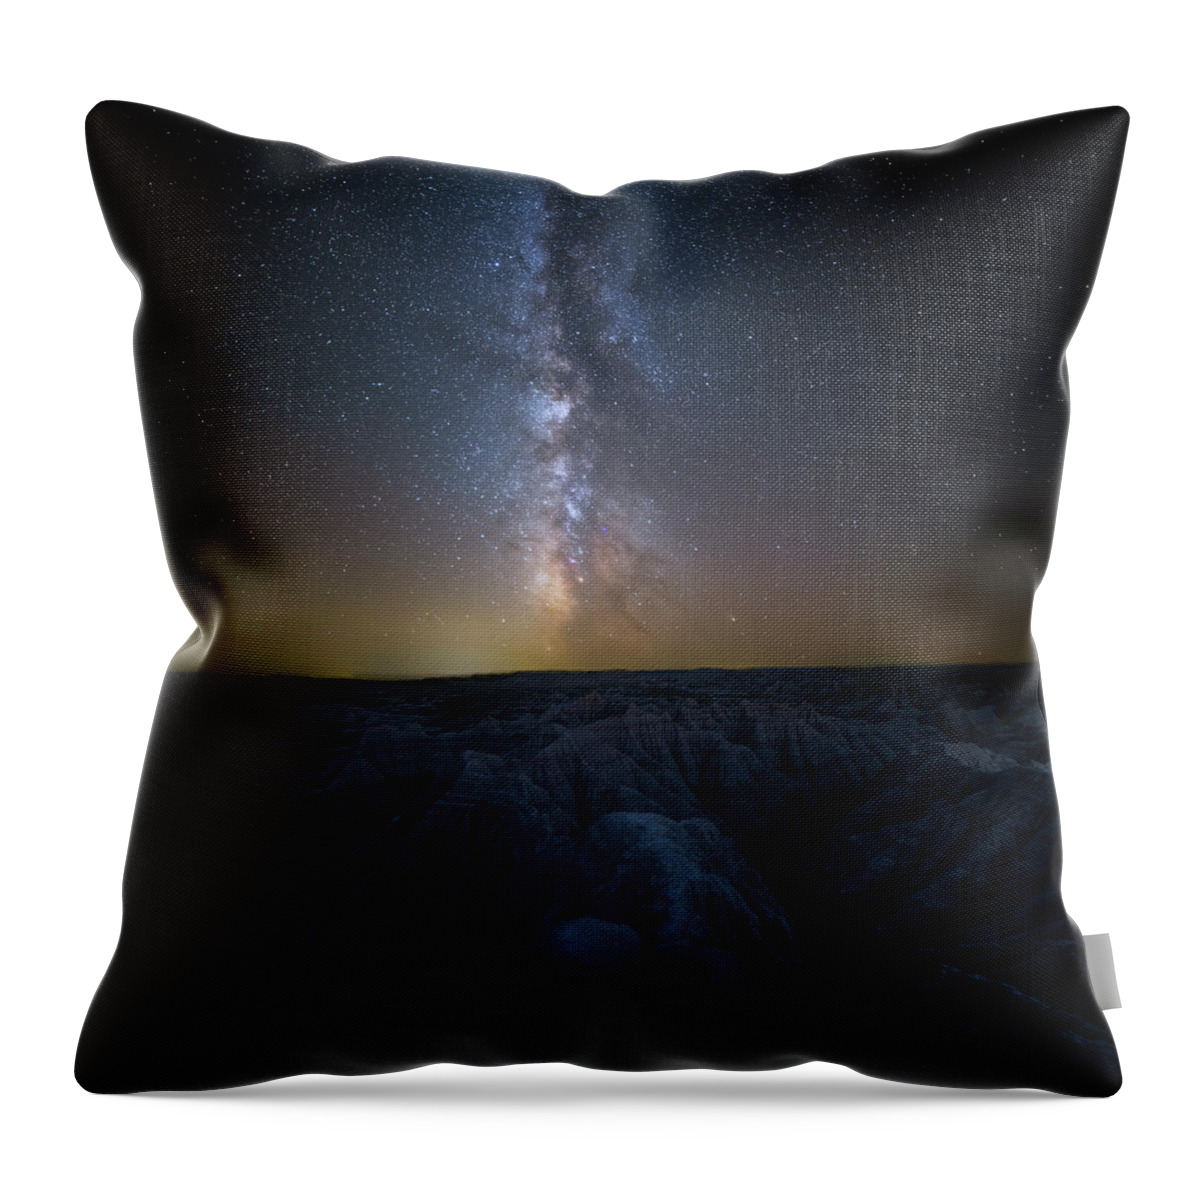 Sky Landscape Badlands Travel Night Stars Usa 500px September Long Exposure Space Star Astronomy Cosmos National Park Milky Way Core Prints Astrophotography Throw Pillow featuring the photograph Badlands II by Aaron J Groen